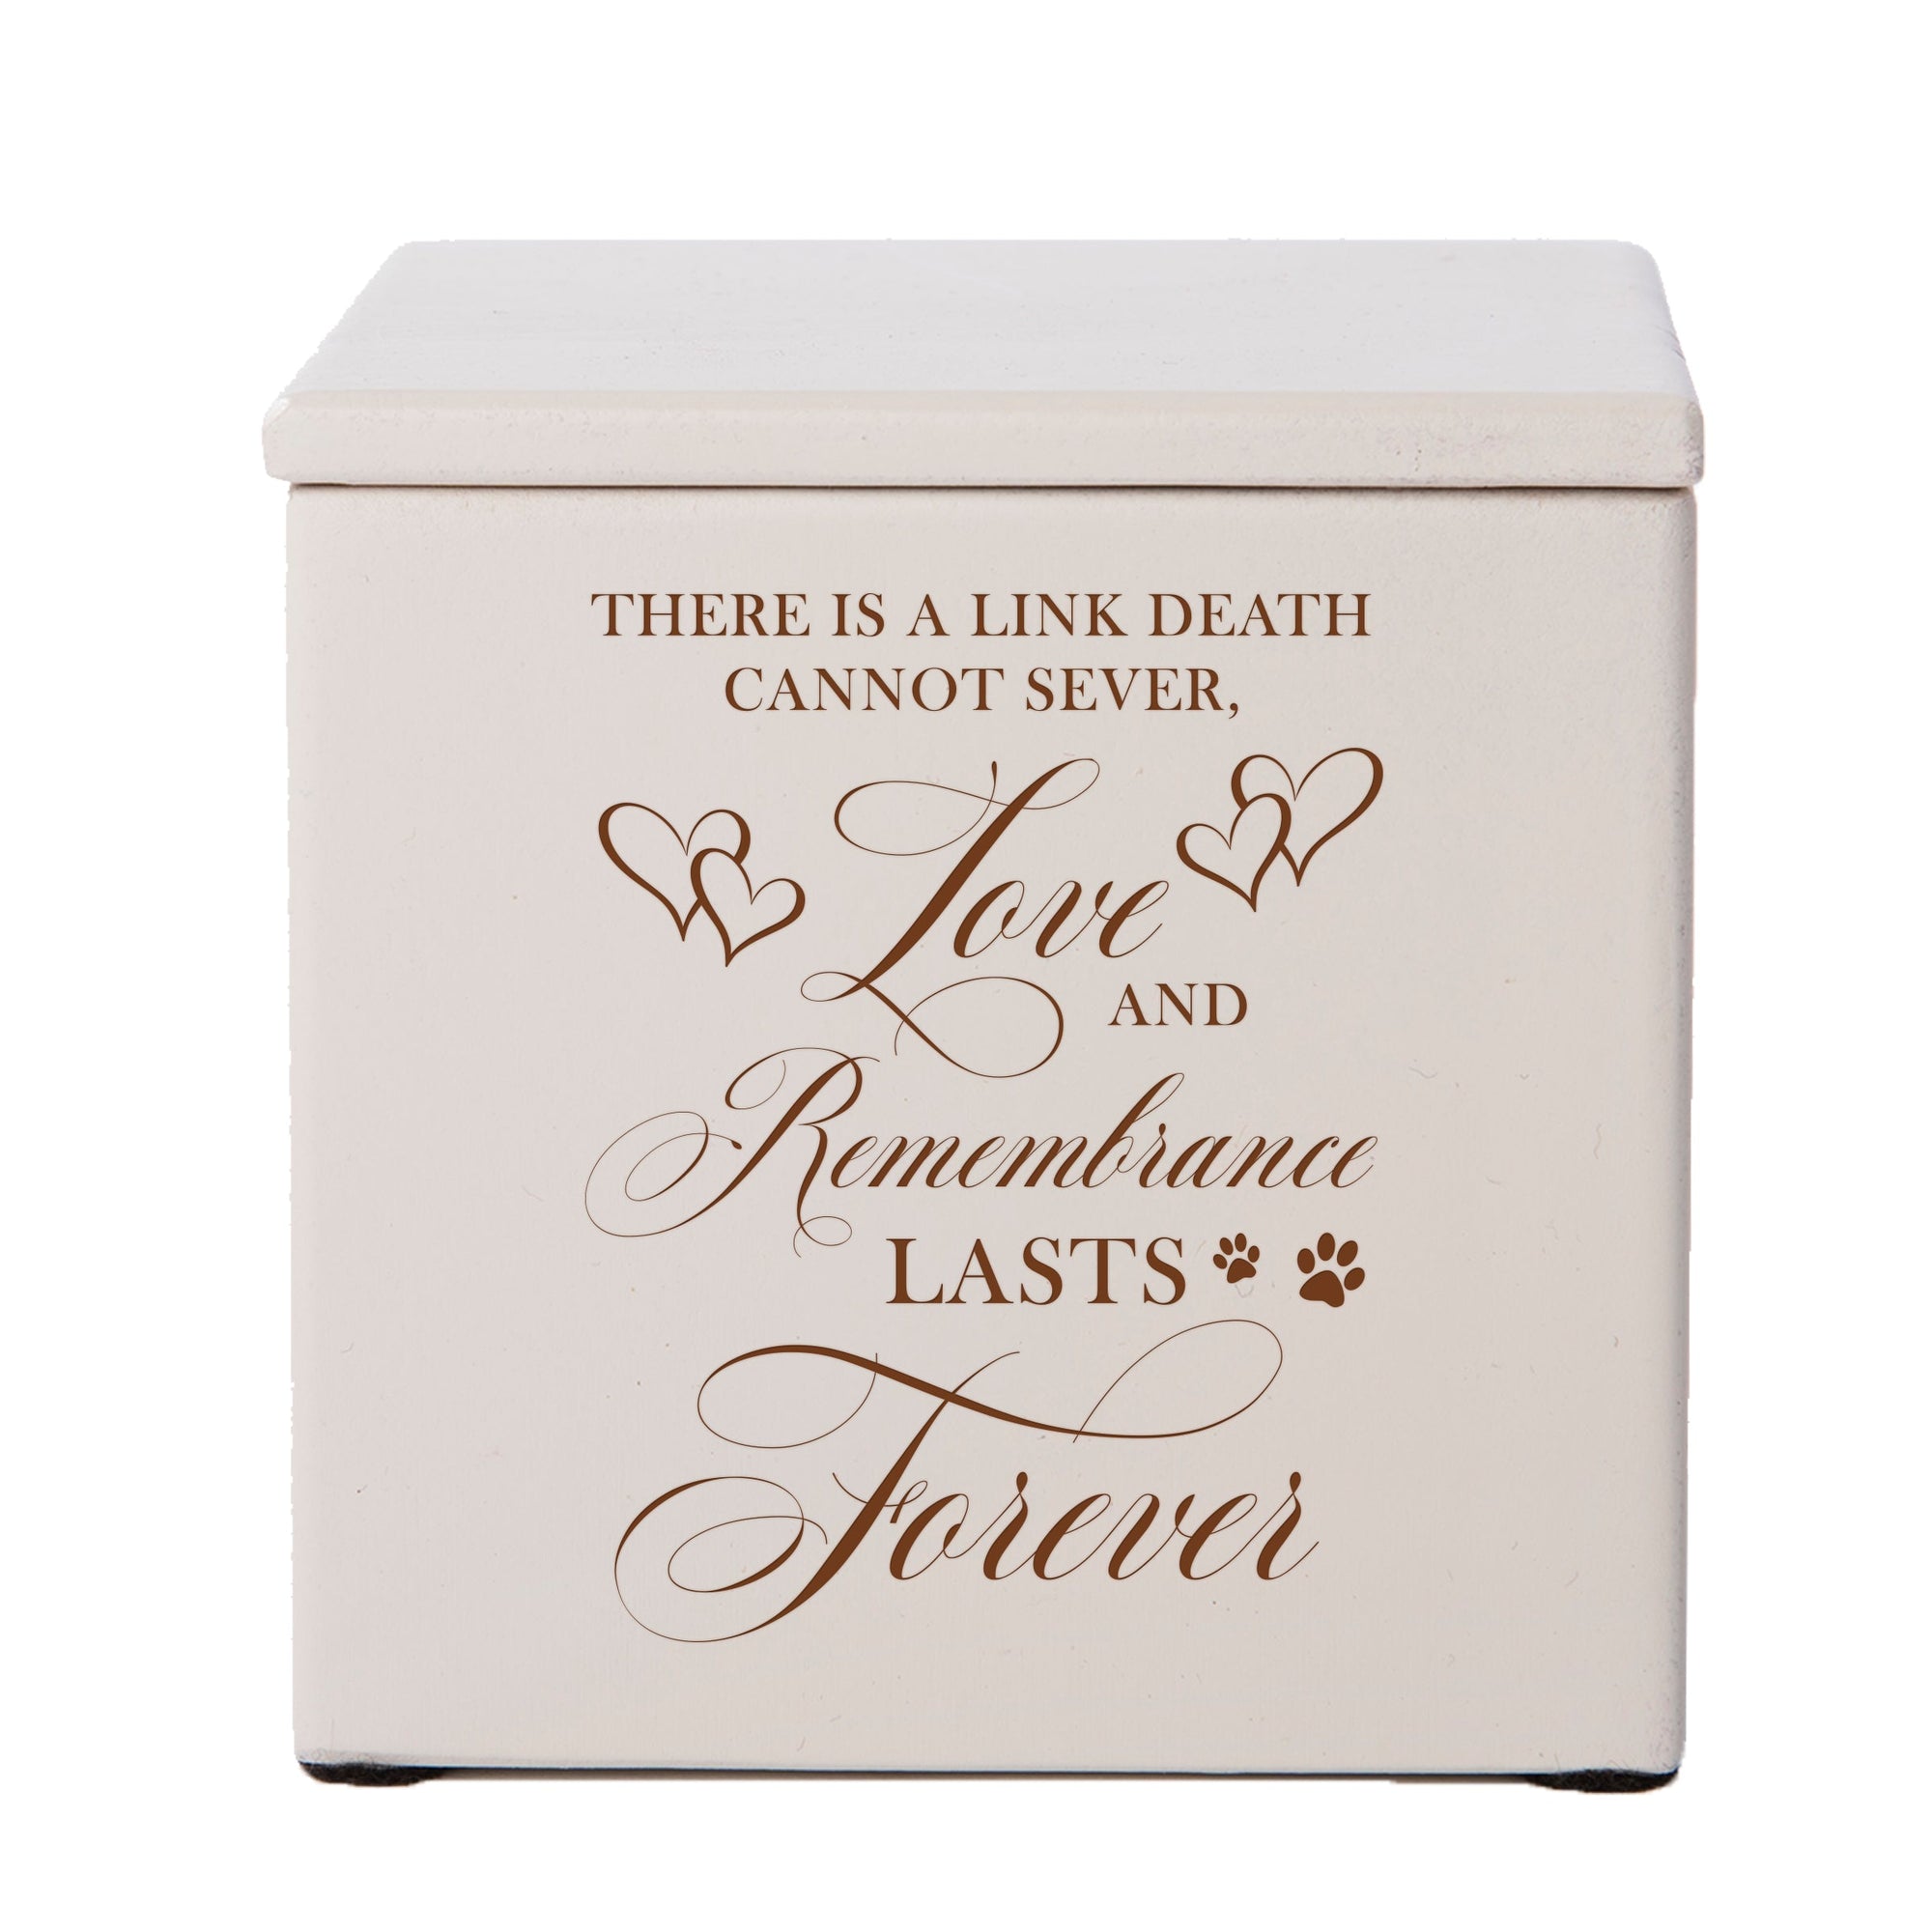 Pet Memorial Keepsake Cremation Urn Box for Dog or Cat - There Is A Link Death Cannot Sever